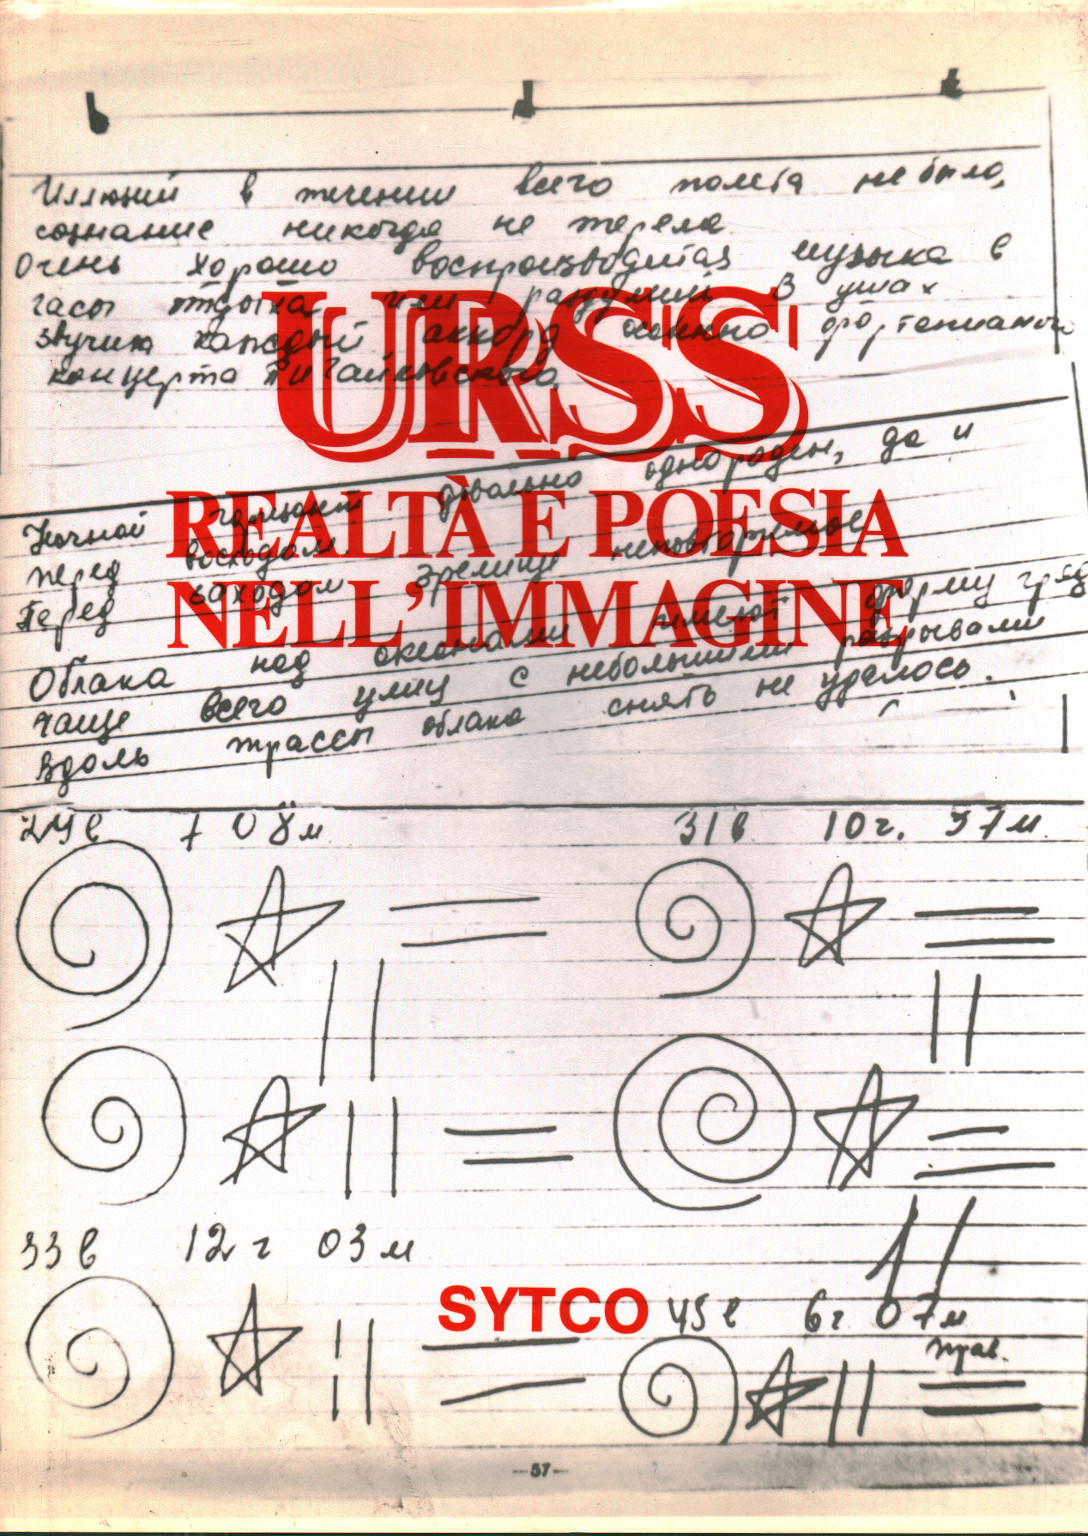 USSR. Reality and poetry in image, s.a.